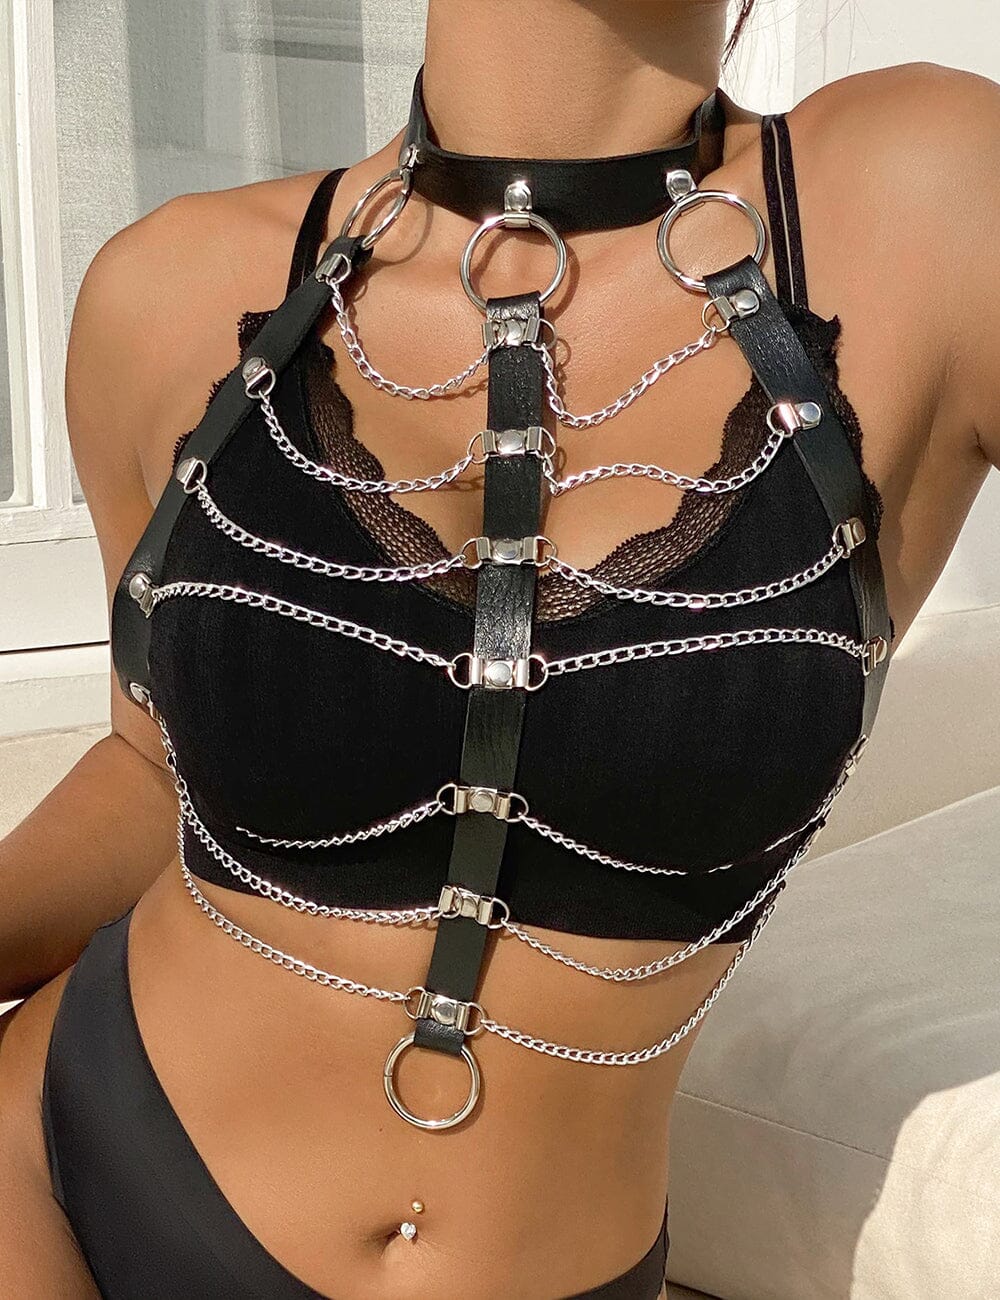 a woman wearing a black bra with chains on it